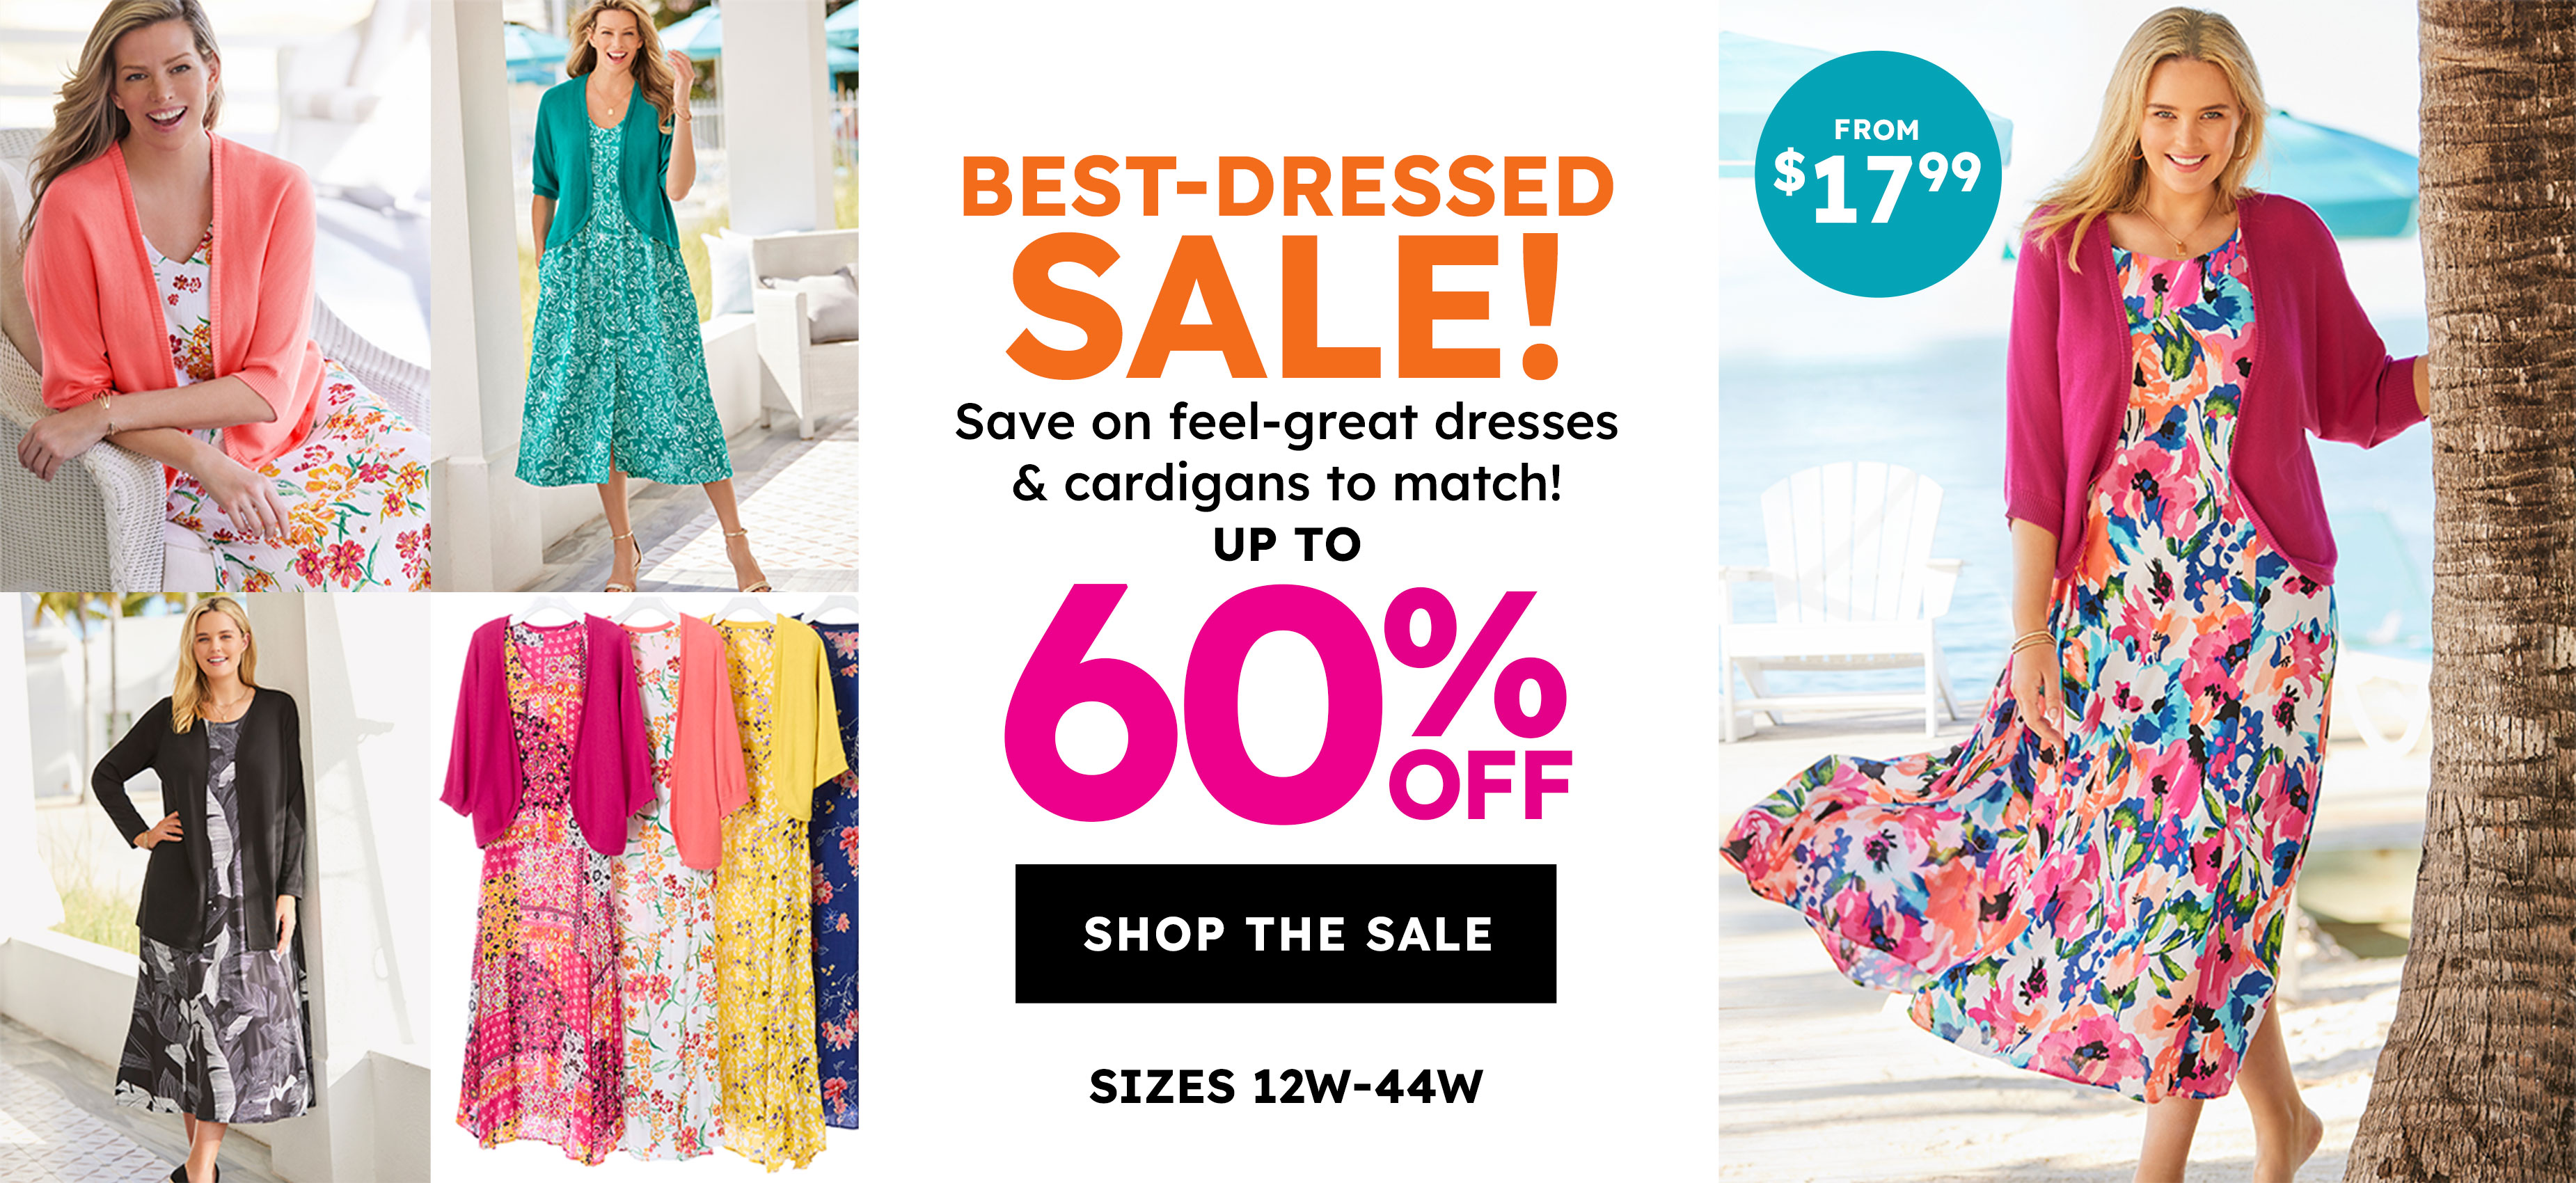 Best dressed sale! save on feel great dresses & cardigans to match! up to 60% off shop the sale